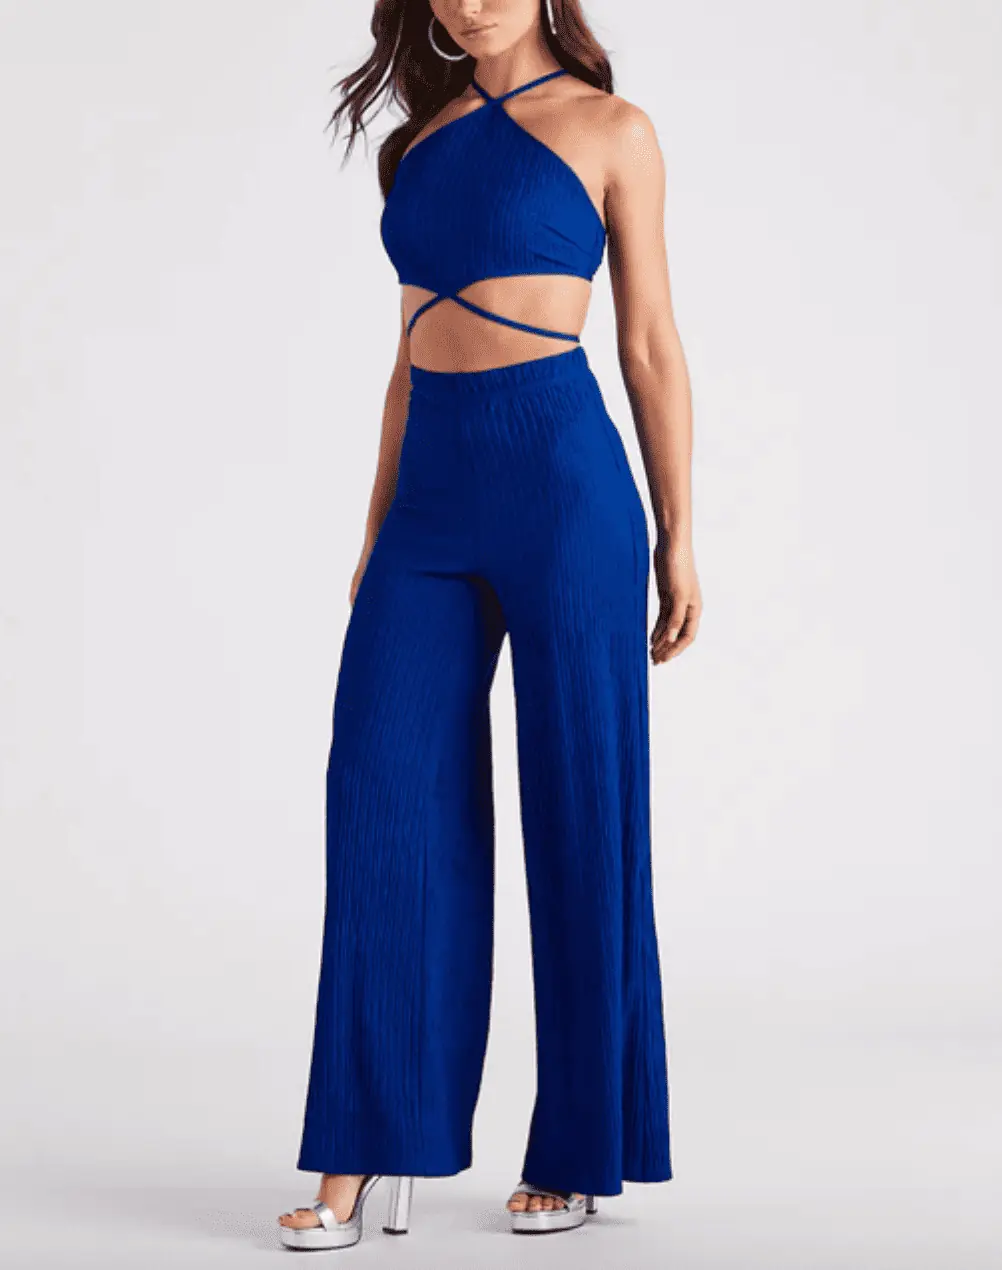 Melissa Gorga's Blue Strappy Crop Top and Pant Set